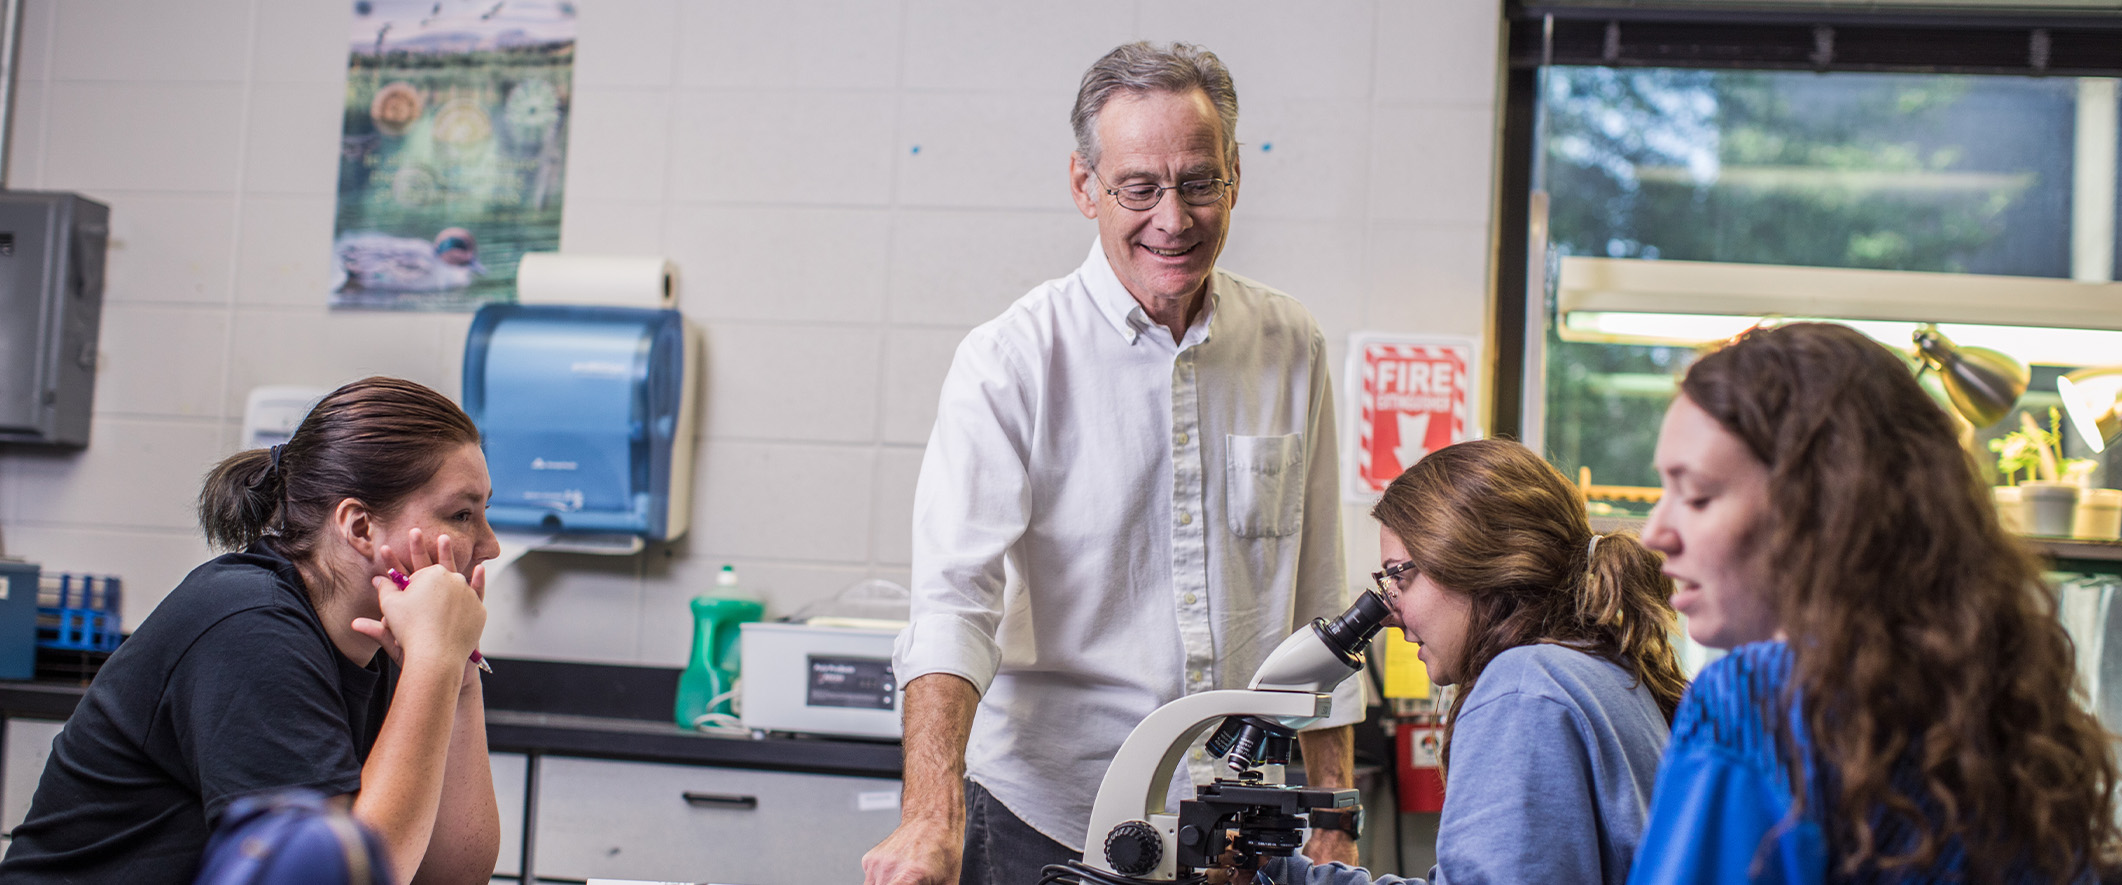 Science professor working with three students and a microscope in a classroom lab